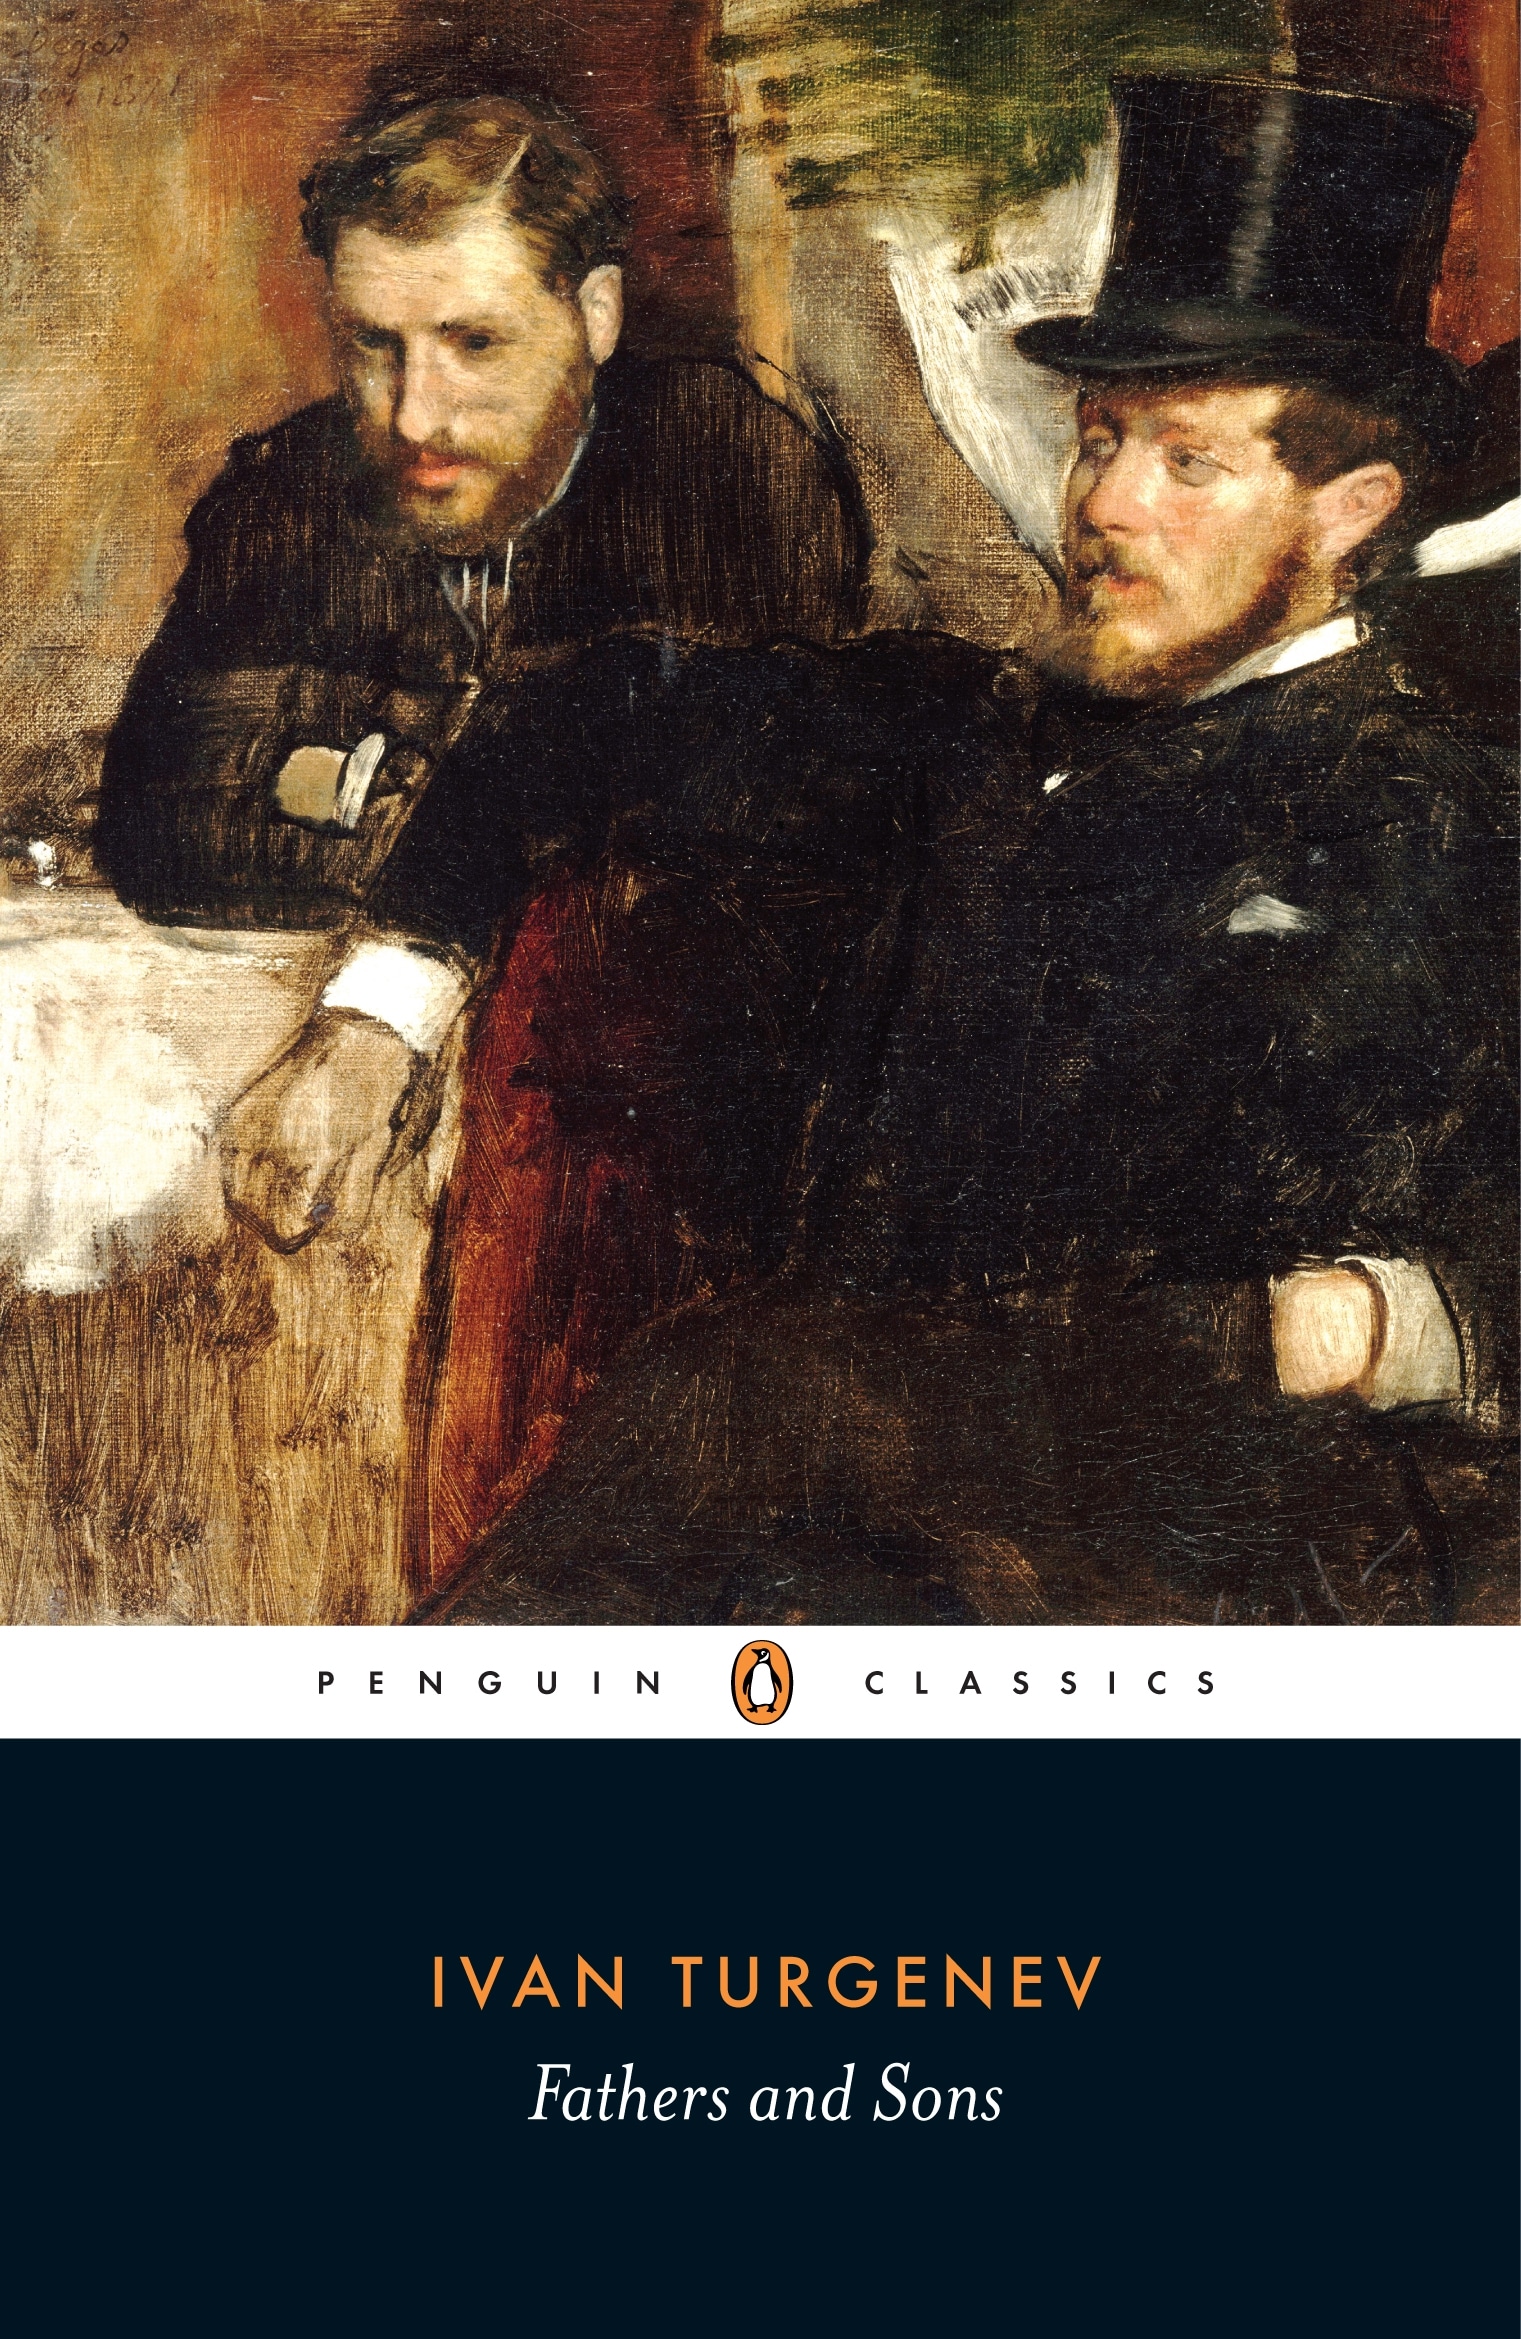 Book “Fathers and Sons” by Ivan Turgenev — September 24, 2009